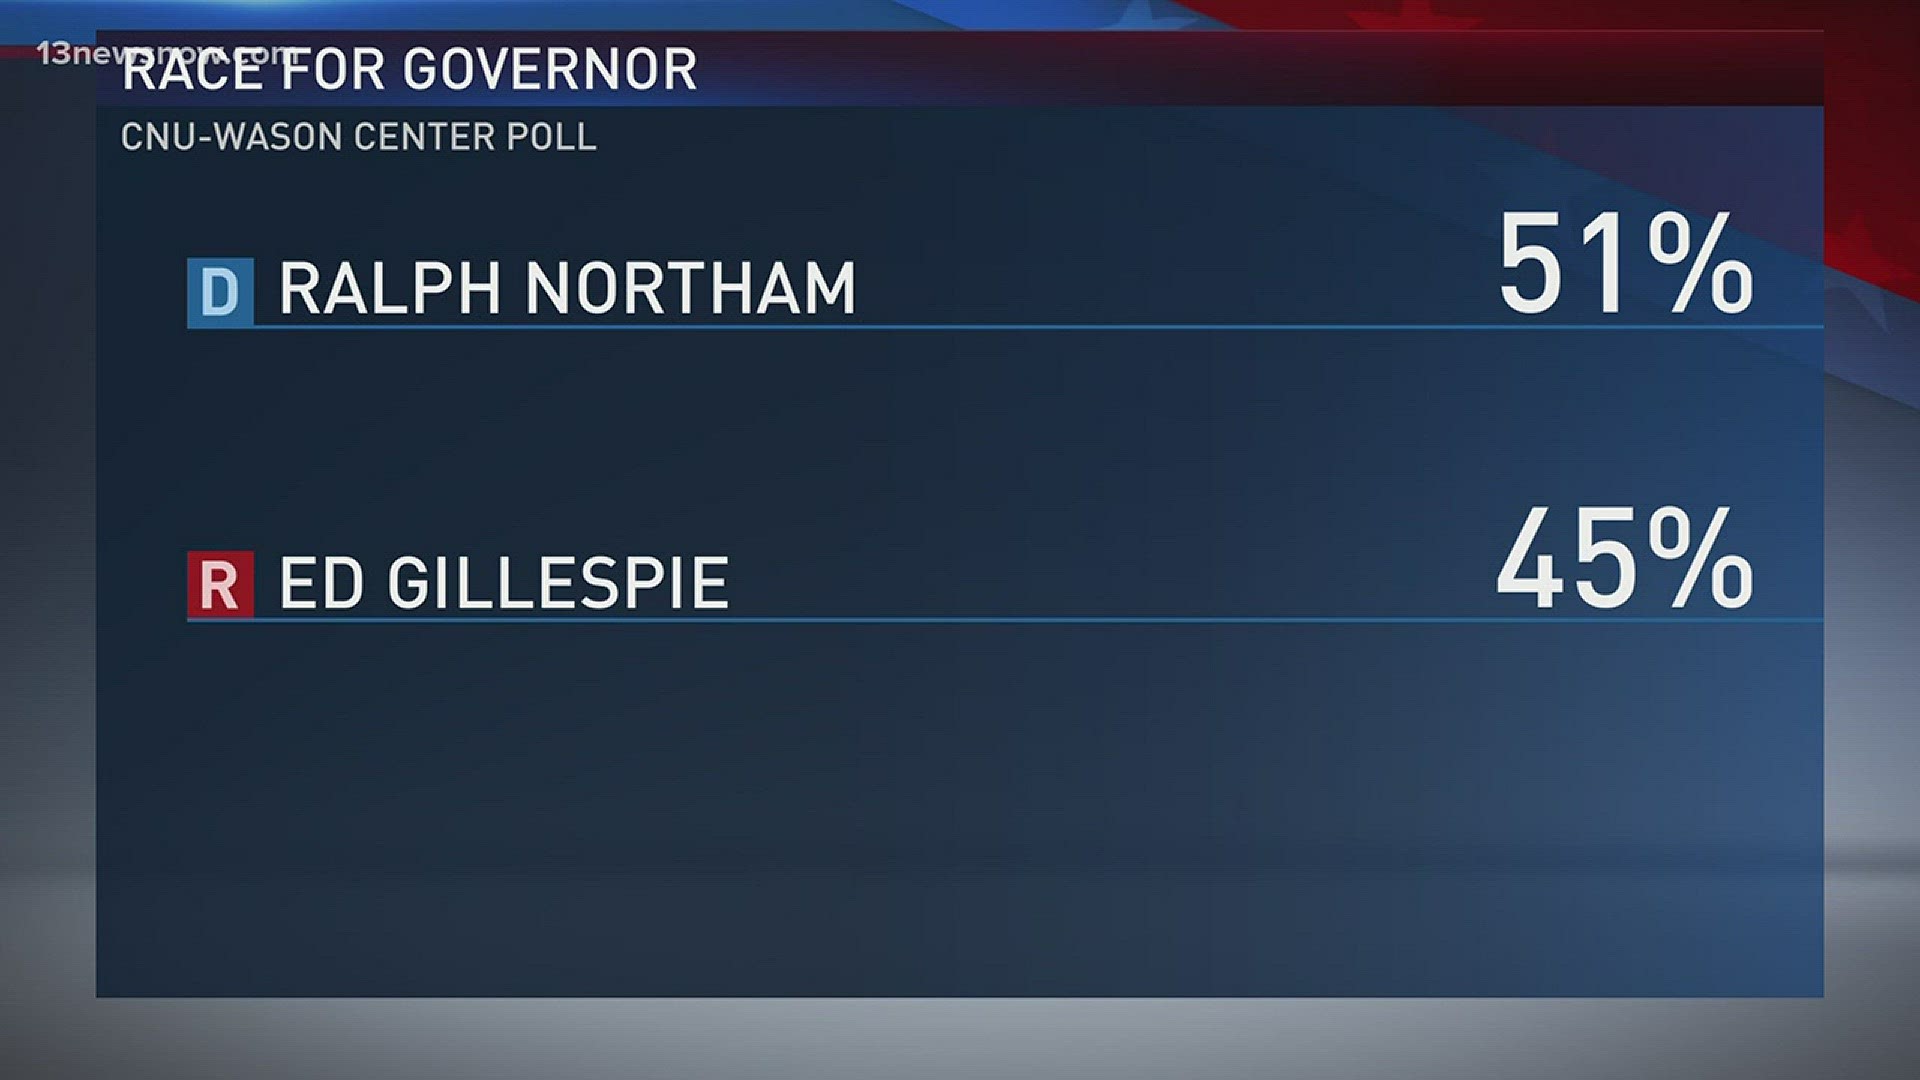 The Wason Center at Christopher Newport University released their final poll on Monday morning, showing Northam ahead with a six-point advantage.